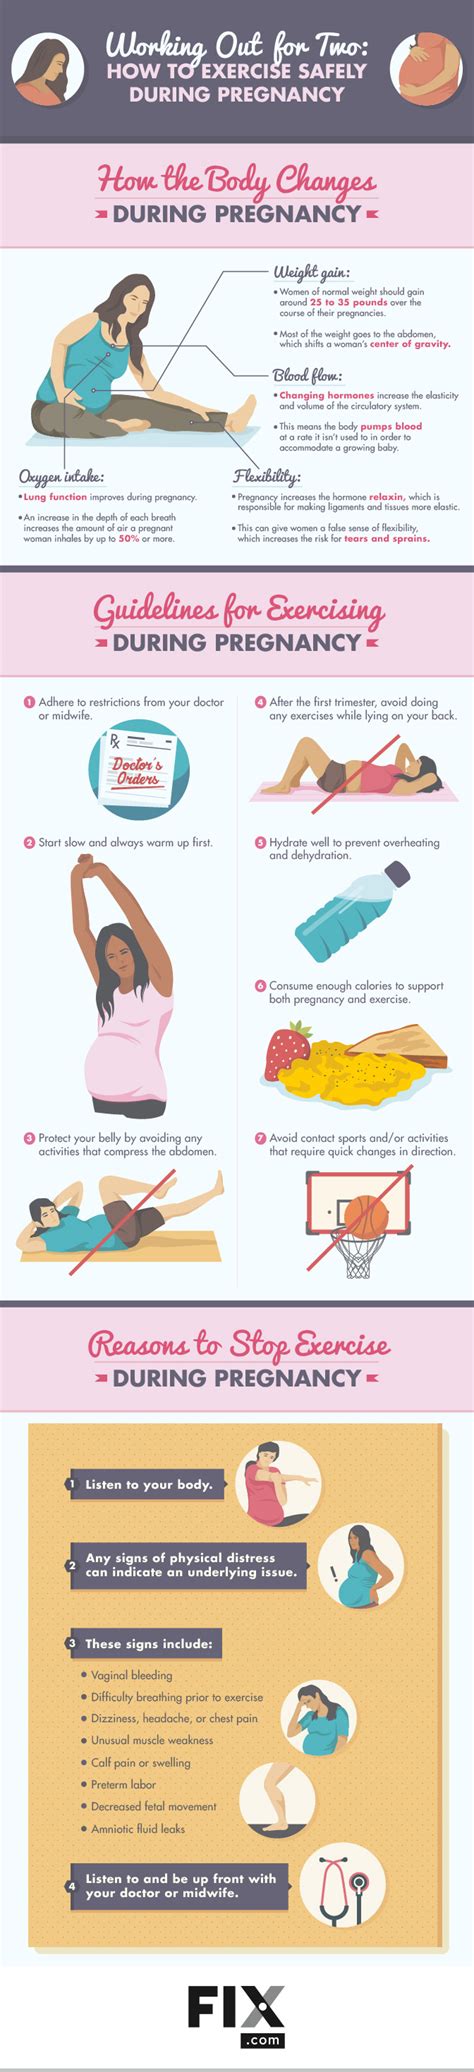 How To Exercise Safely During Pregnancy [infographic]